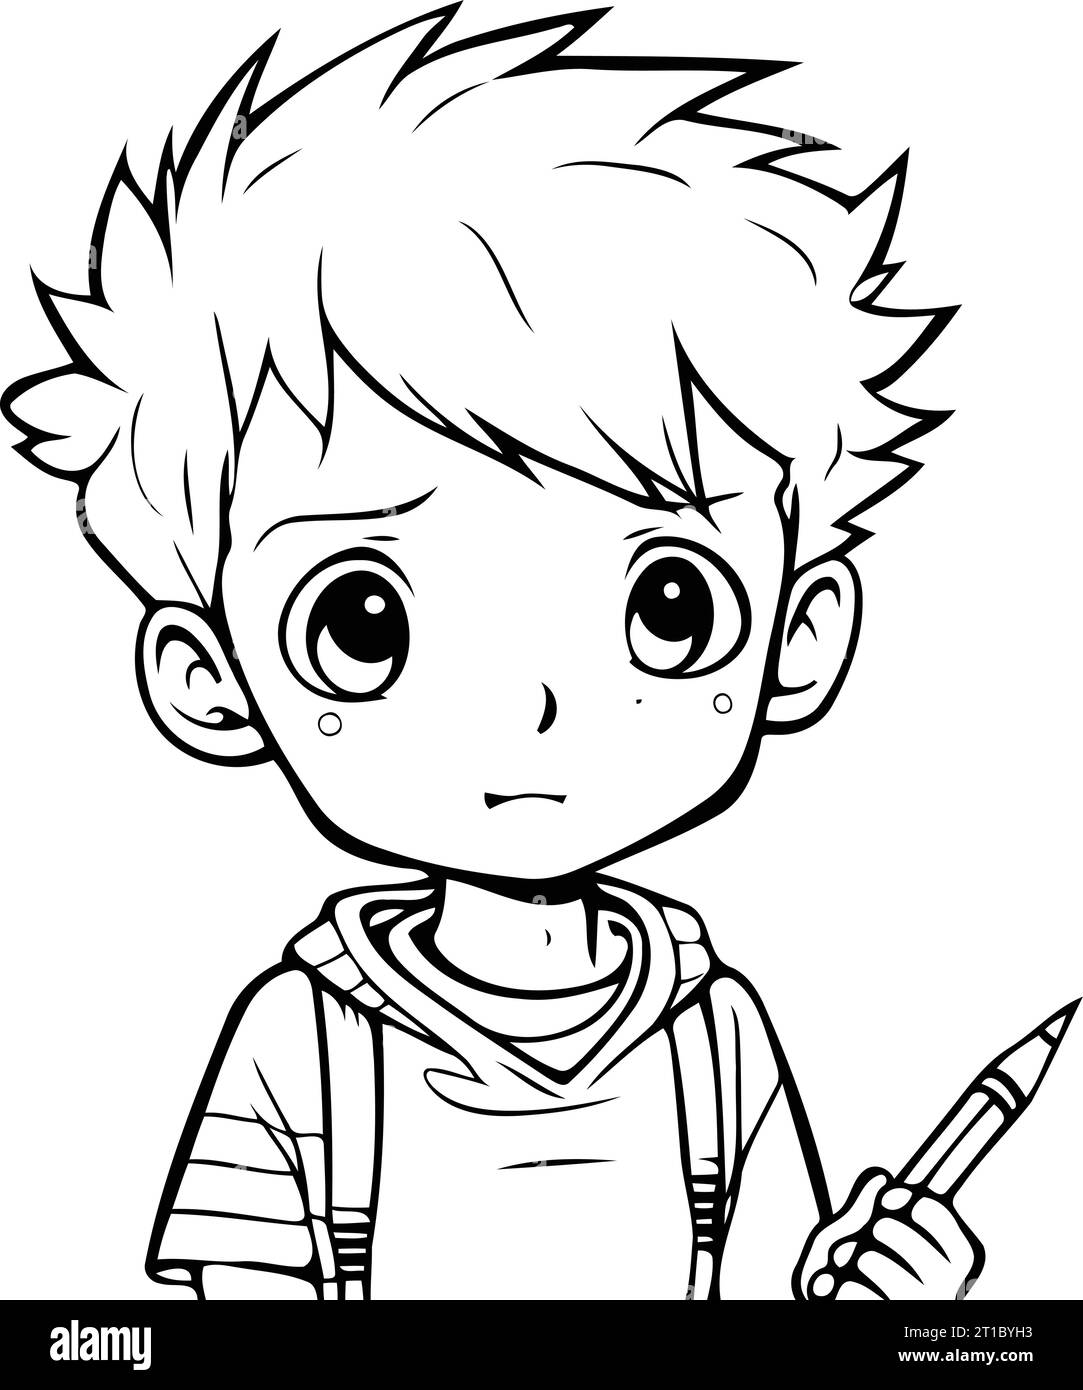 Learn How to Draw a Charming Baby Boy